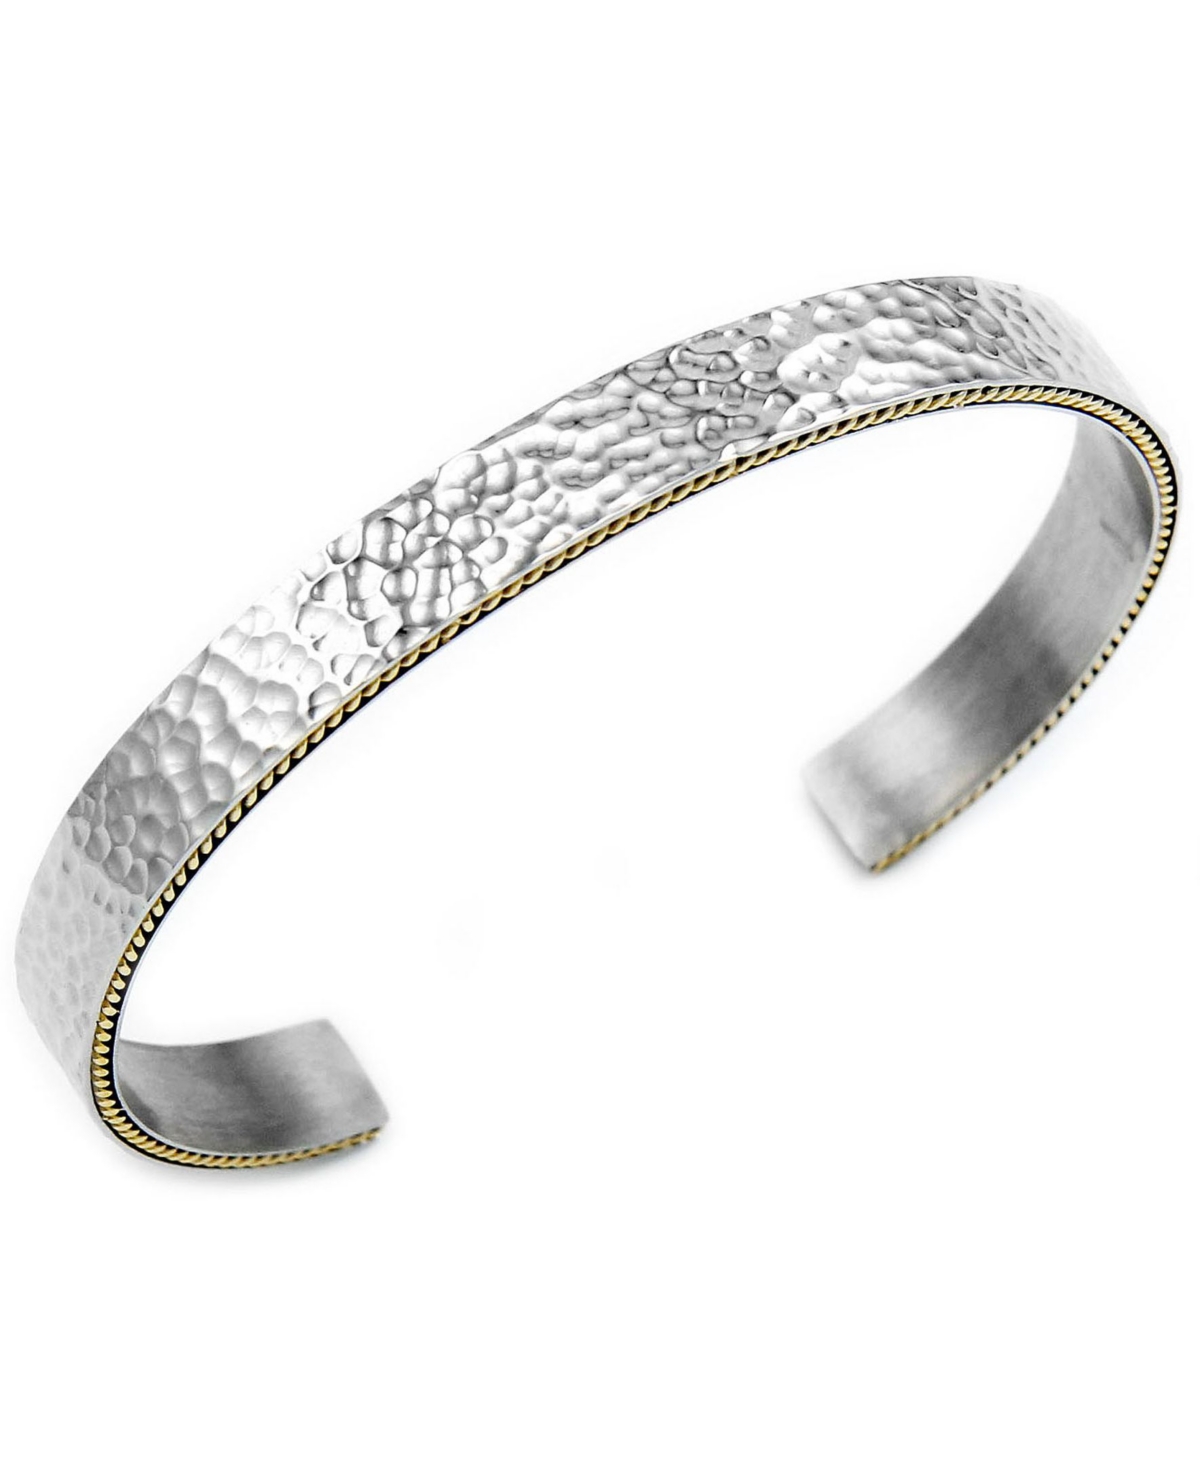 Sutton Stainless Steel Hammered Bangle Bracelet With Gold-Tone Trim - Two Tone Silver/Gold